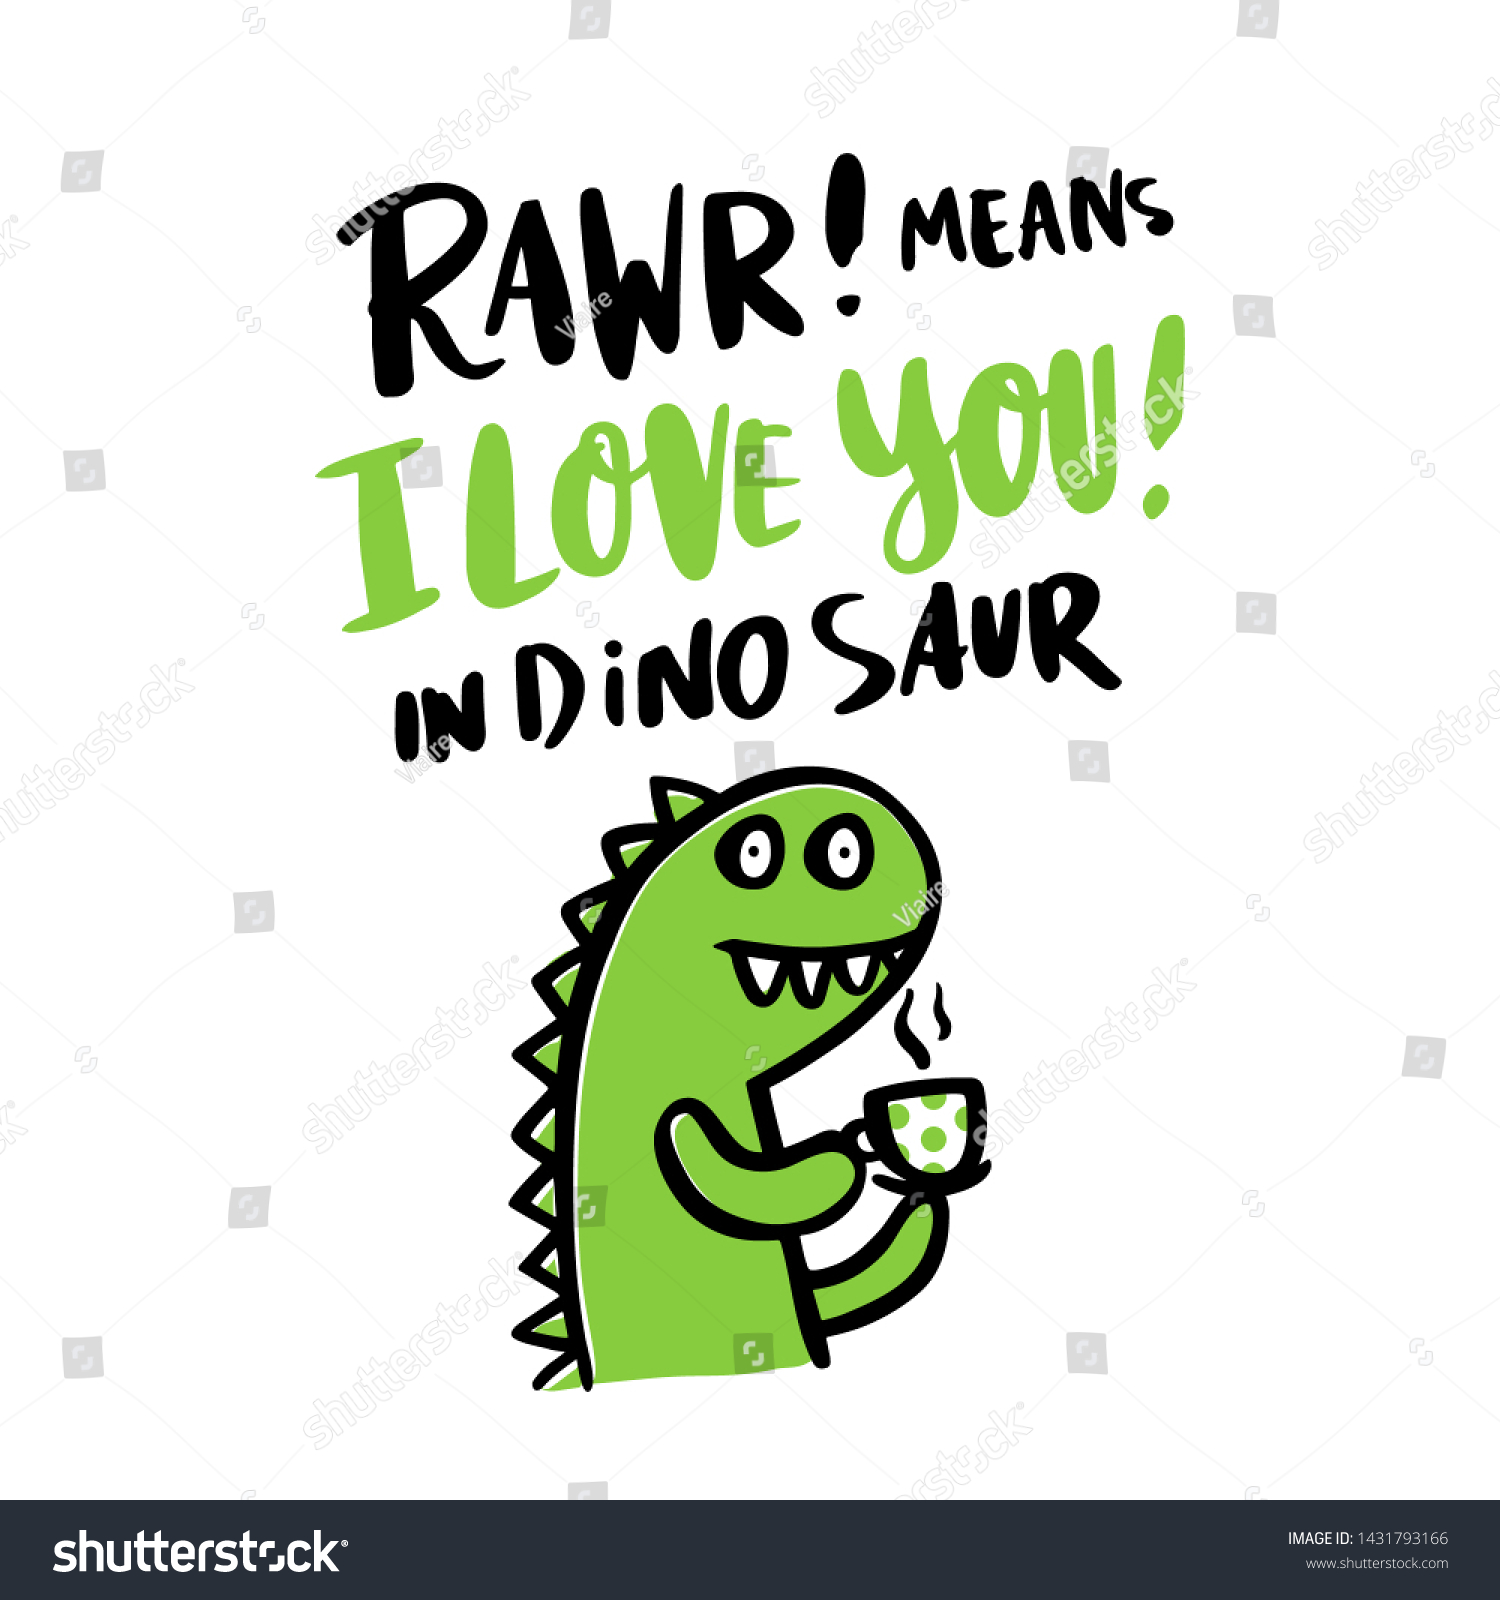 SVG of The inscription: Rawr! means I love you! in dinosaur and cartoon funny dinosaurin, on a white background. It can be used for card, mug, brochures, poster, t-shirts, phone case etc. Vector Image.  svg